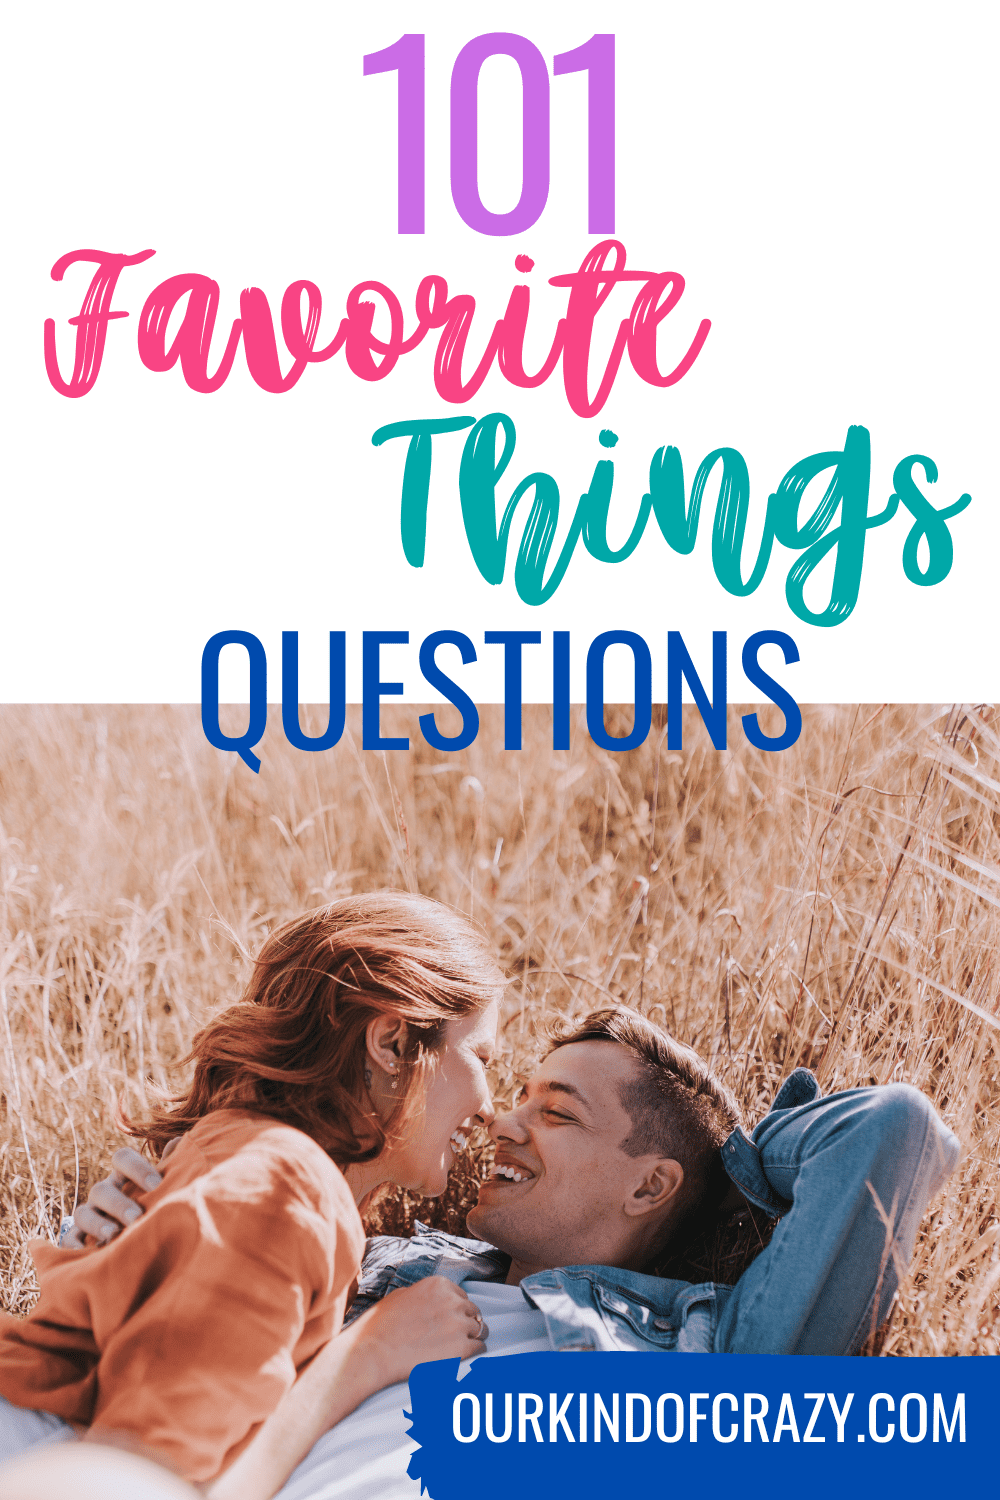 My Favorite Things List Questions  Favorite things list, Getting to know  you, About me questions